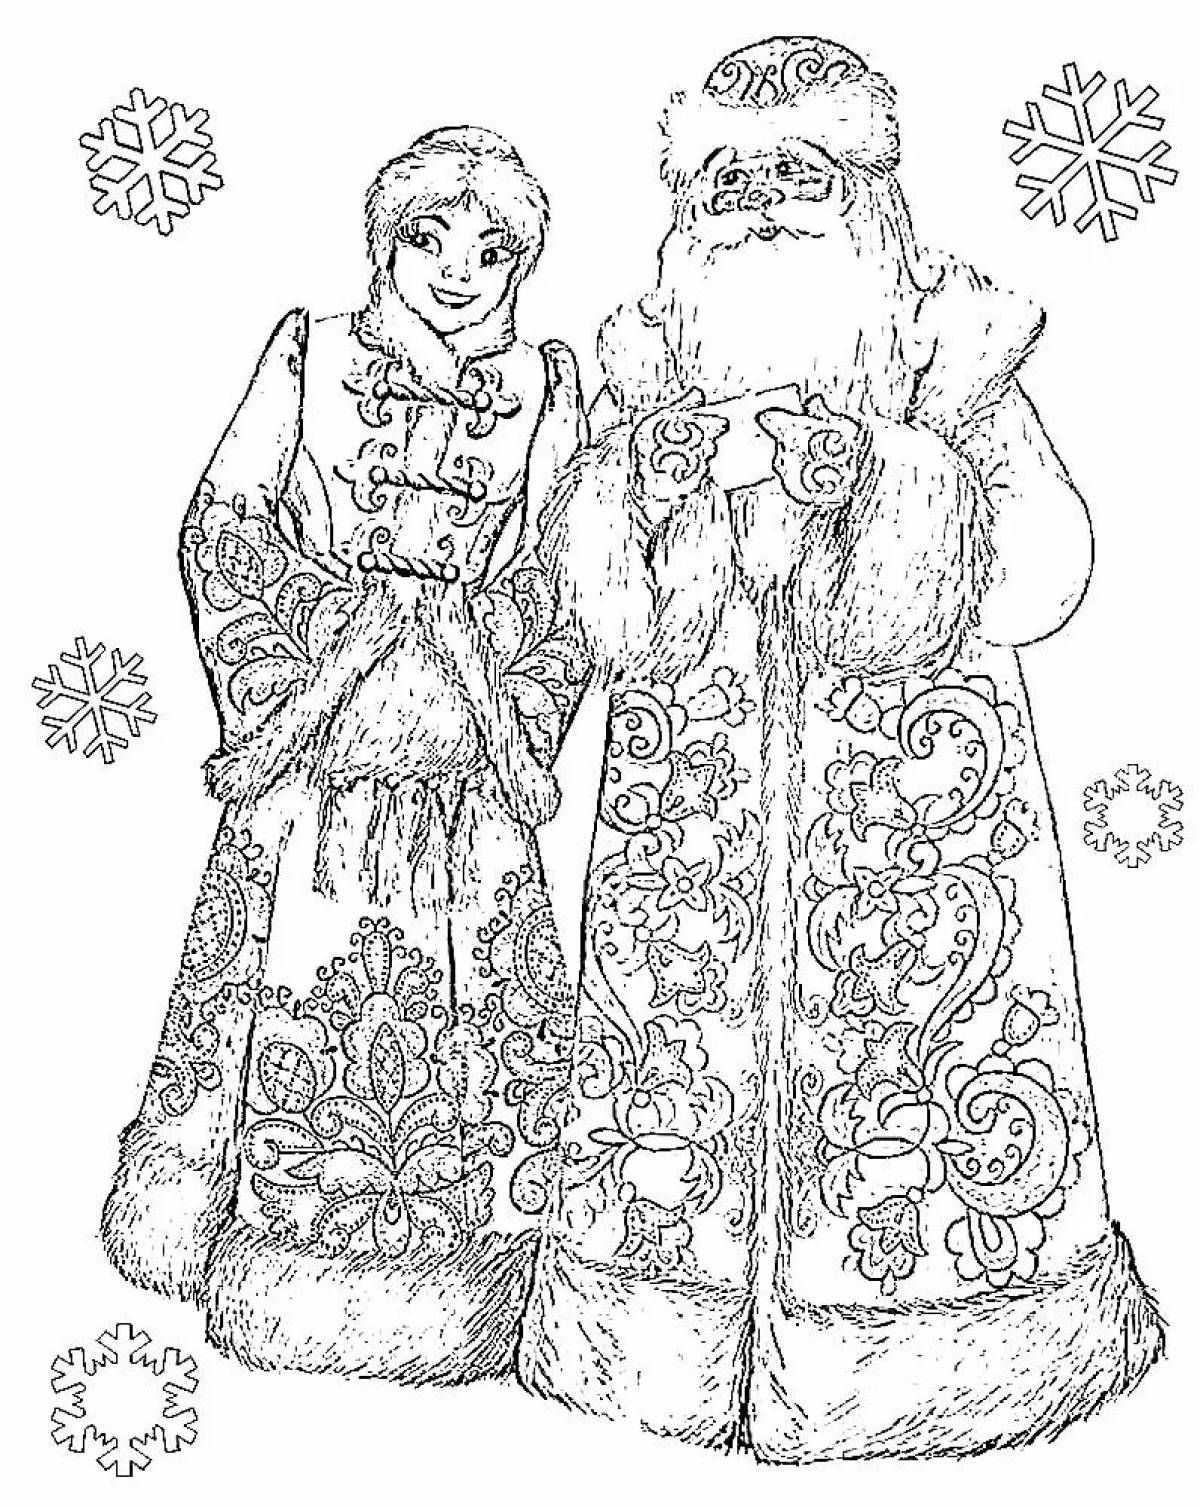 Santa Claus and Snow Maiden drawing #13